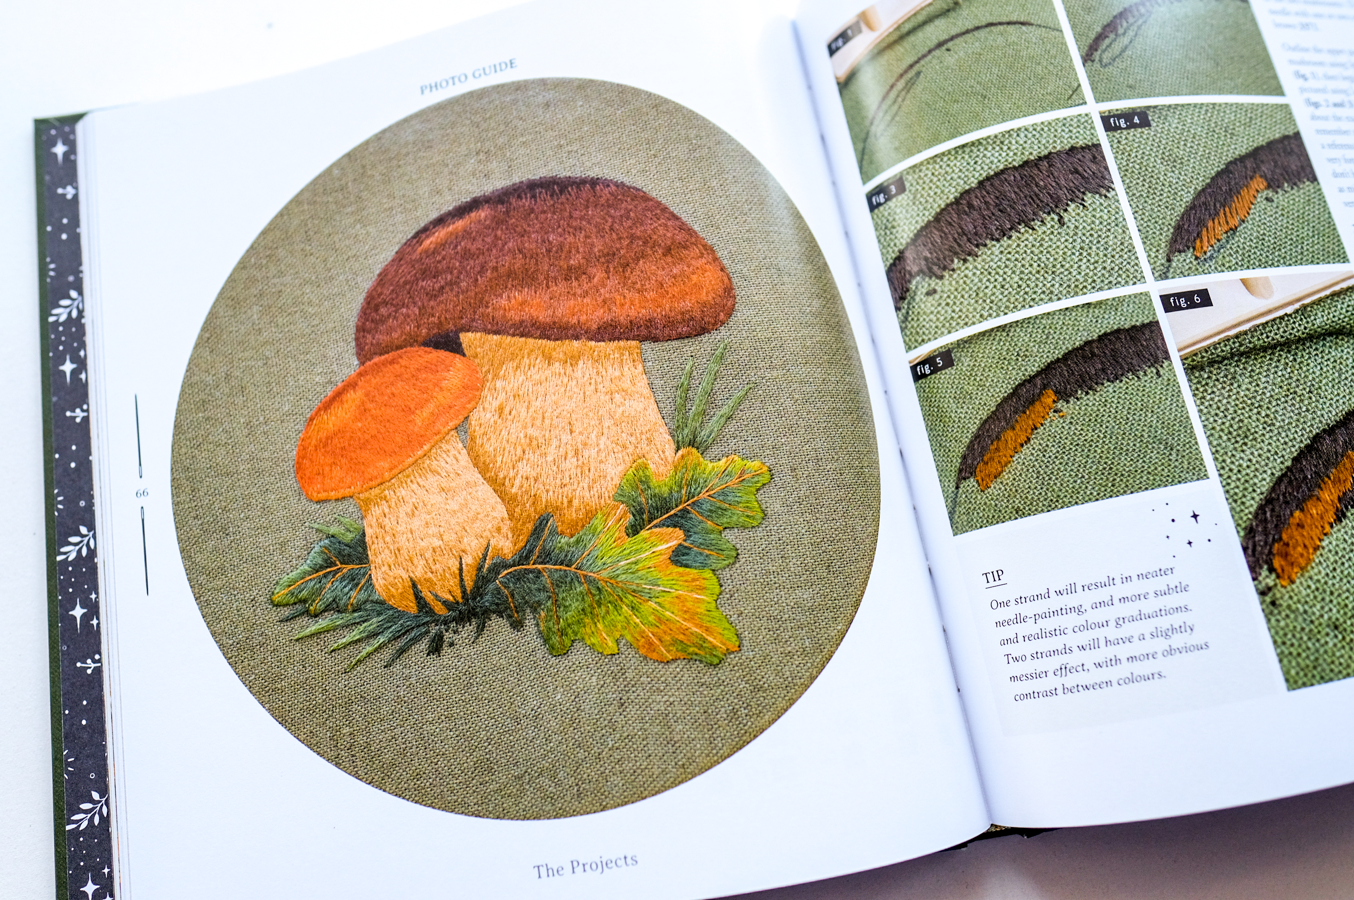 Paint with Thread: A Step-by-Step Guide to Embroidery Through the Seasons by Emillie Ferris